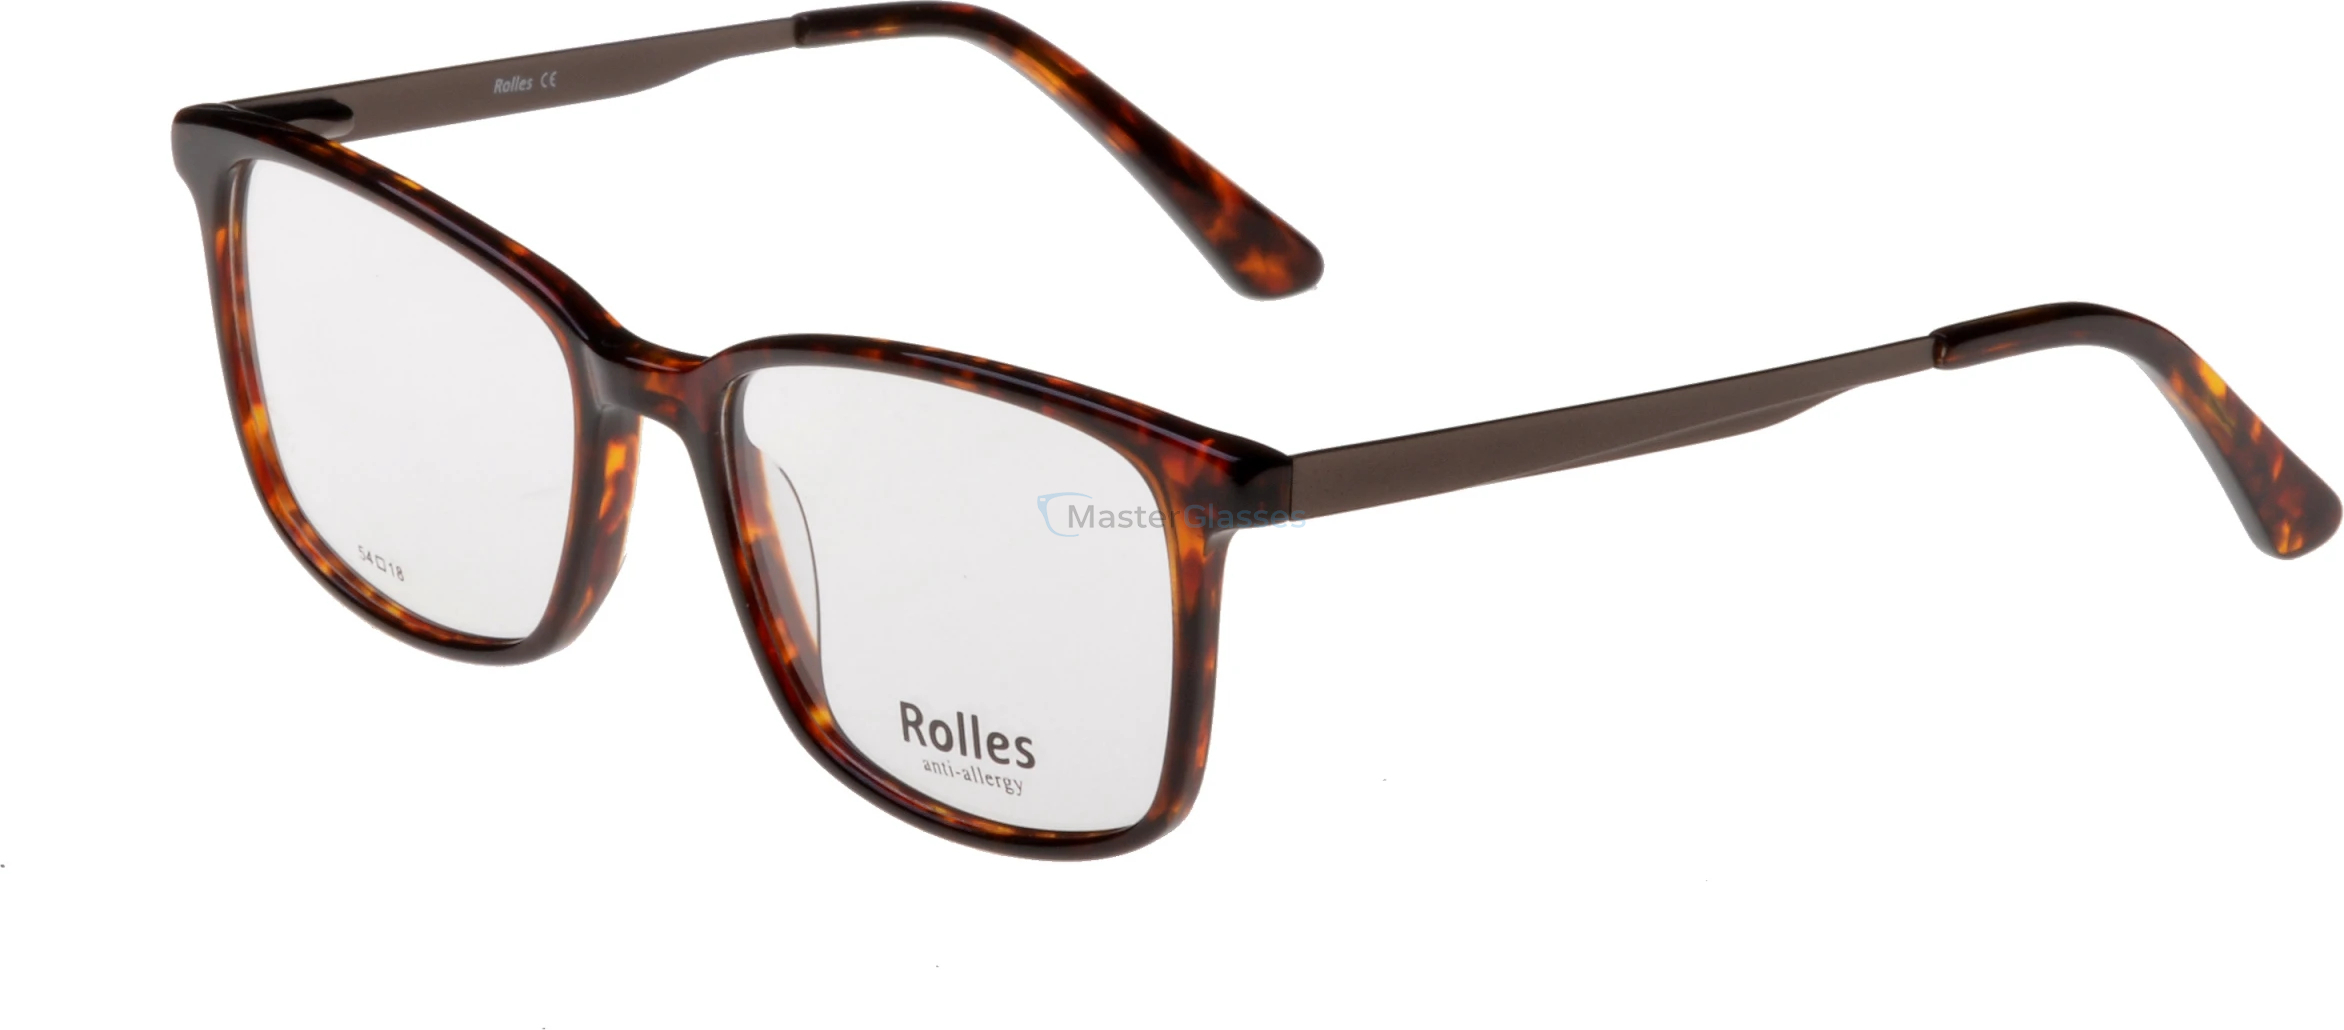  Rolles 425 01